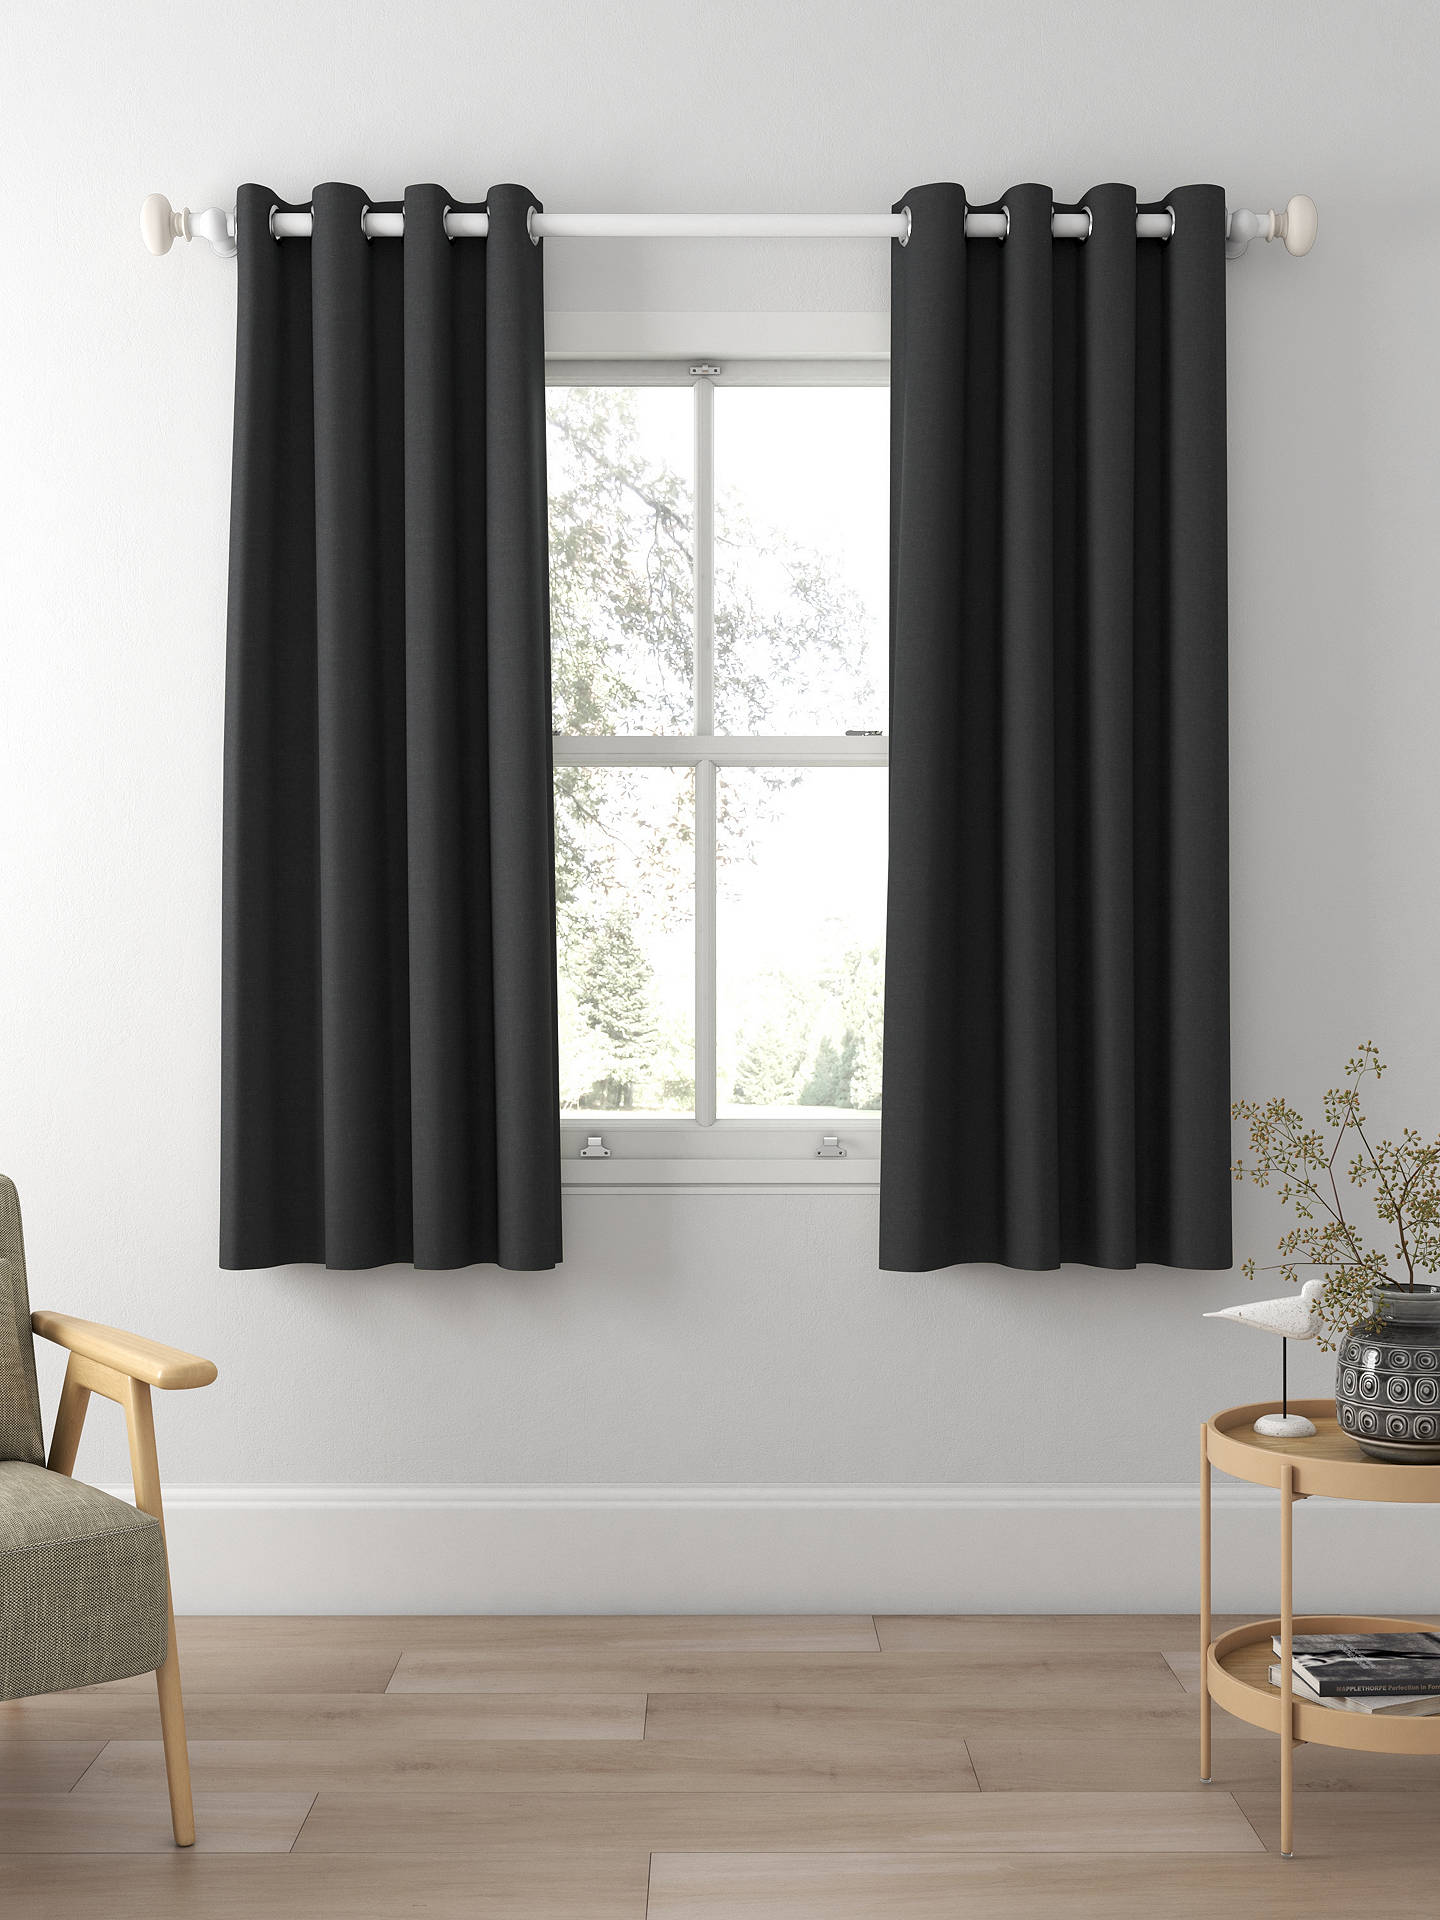 Laura Ashley Swanson Made to Measure Curtains, Charcoal